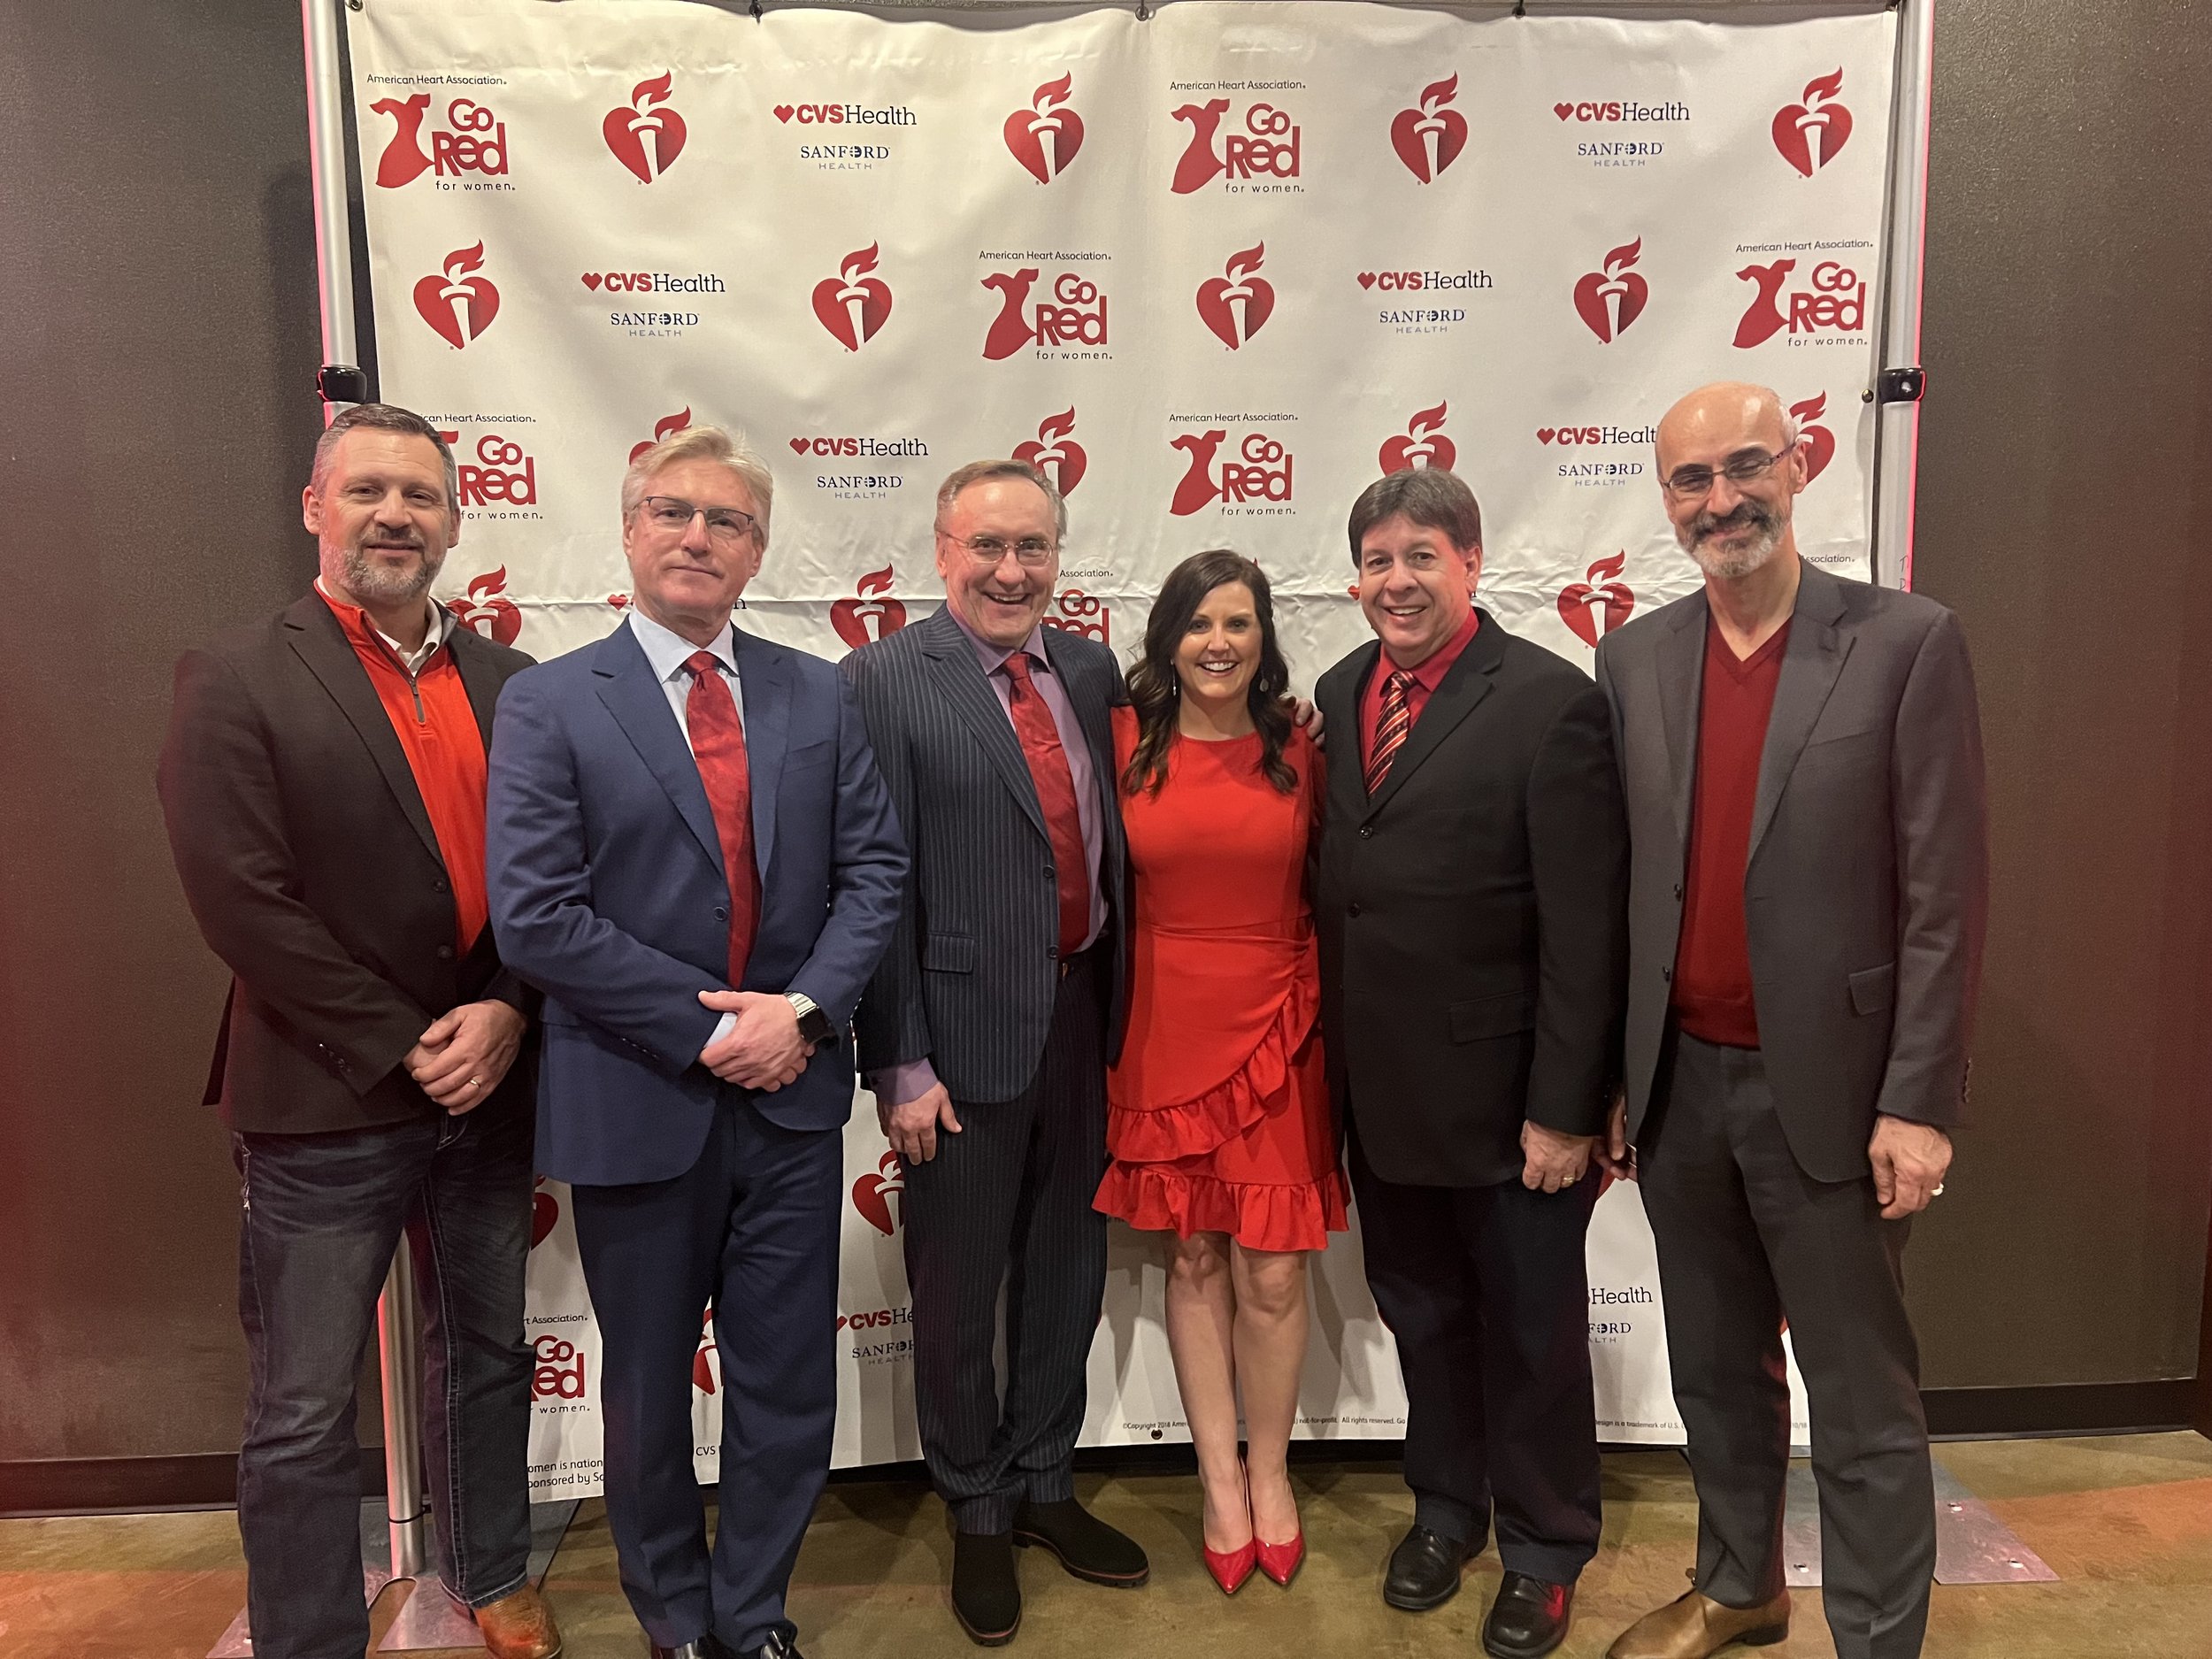  Steff with (l to r) Dr. Josh Crabtree, VP of Sioux Falls Region Clinics; Dr. Tom Stys, Sanford Cardiology Medical Director &amp; Interventional Cardiologist; Dr. Adam Stys, Interventional Cardiologist; Dr. Richard Clark, Cardiologist, and Dr. Marian